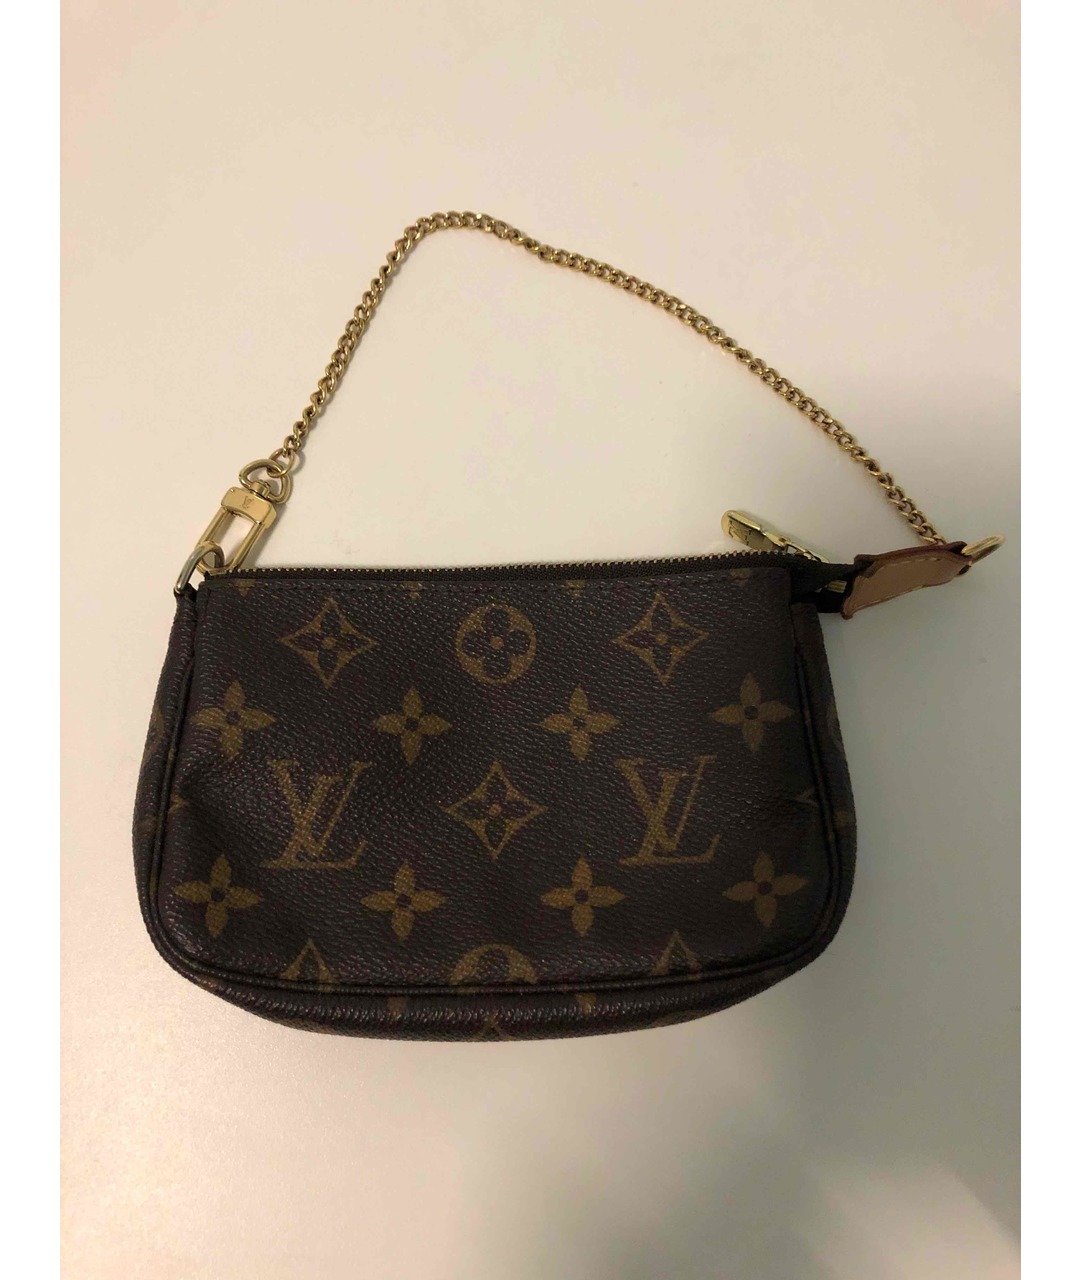 LOUIS VUITTON PRE-OWNED Коричневая косметичка, фото 5